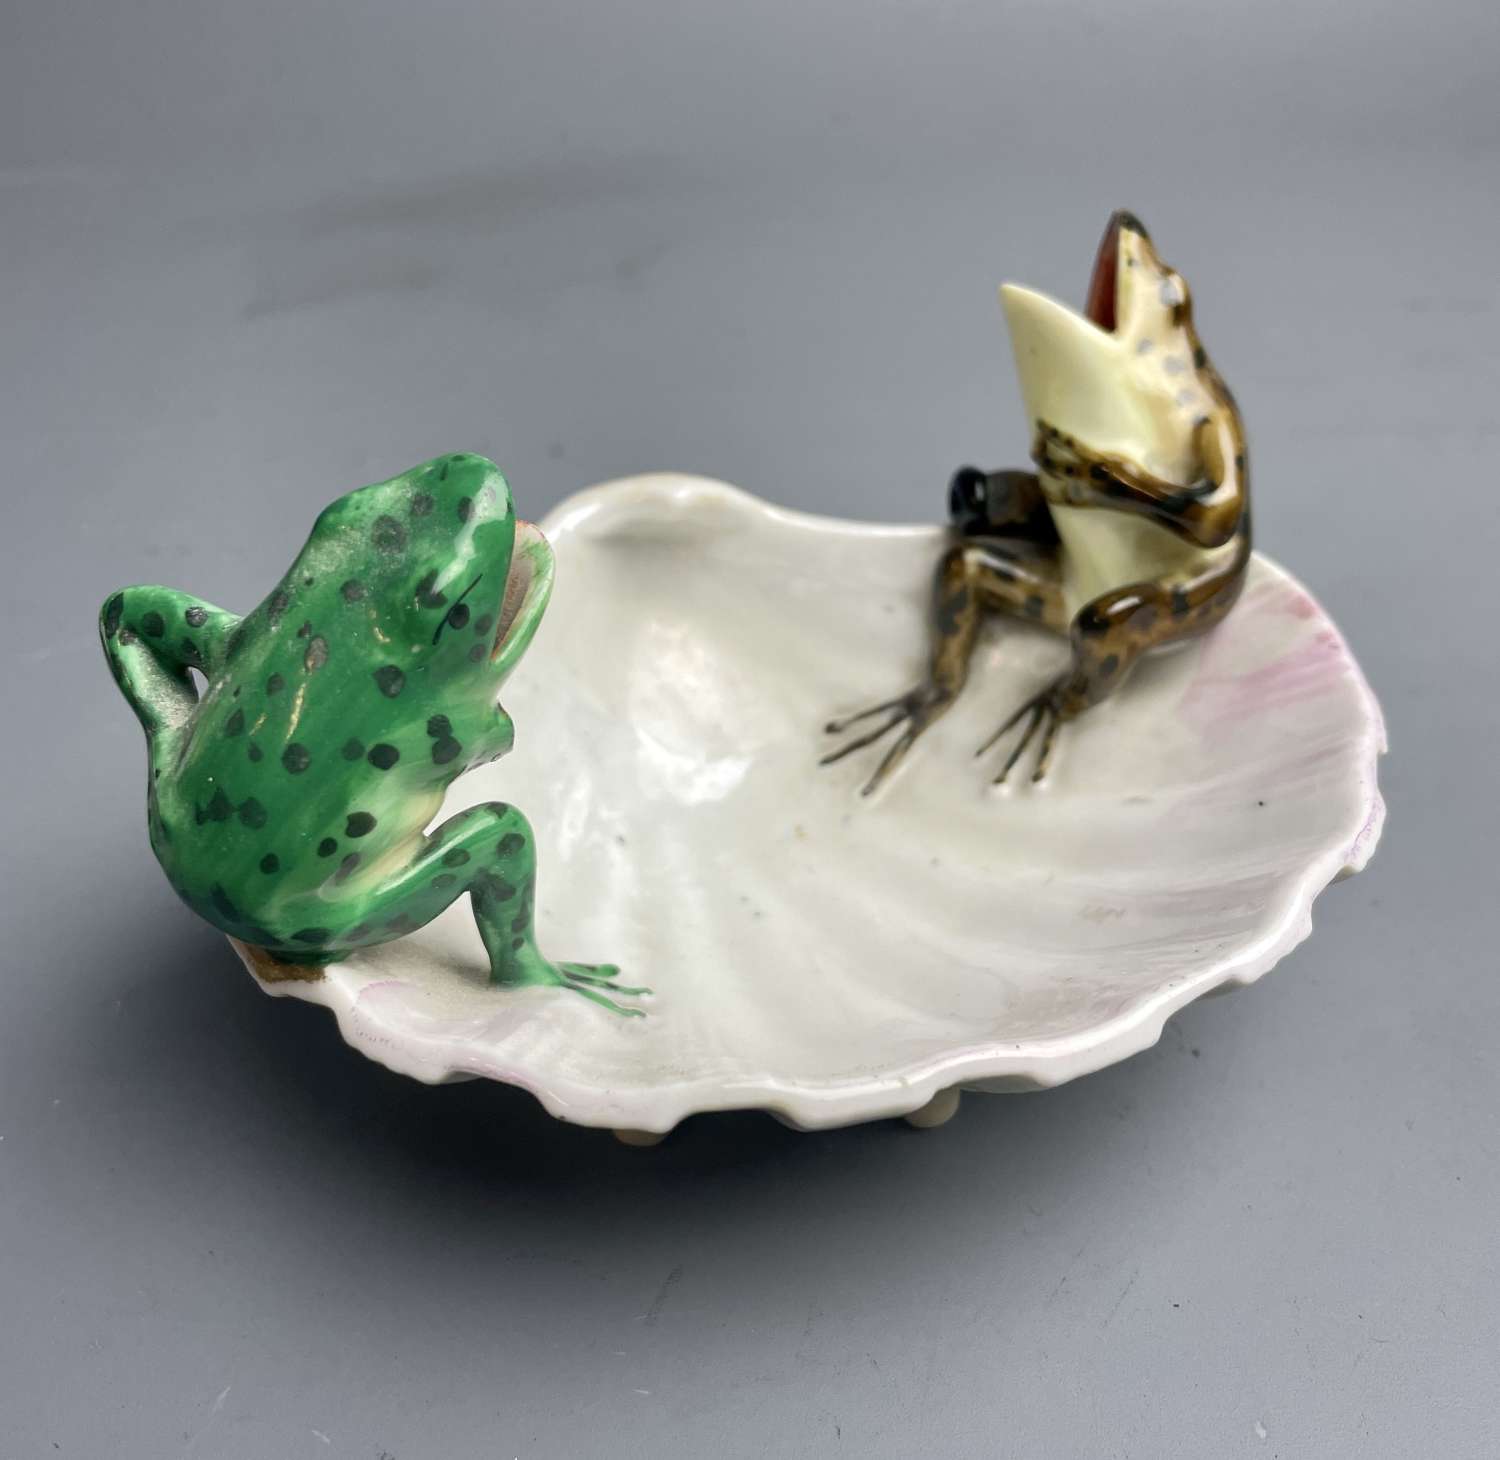 Continental Novelty Porcelain Dish with Two Laughing Frogs